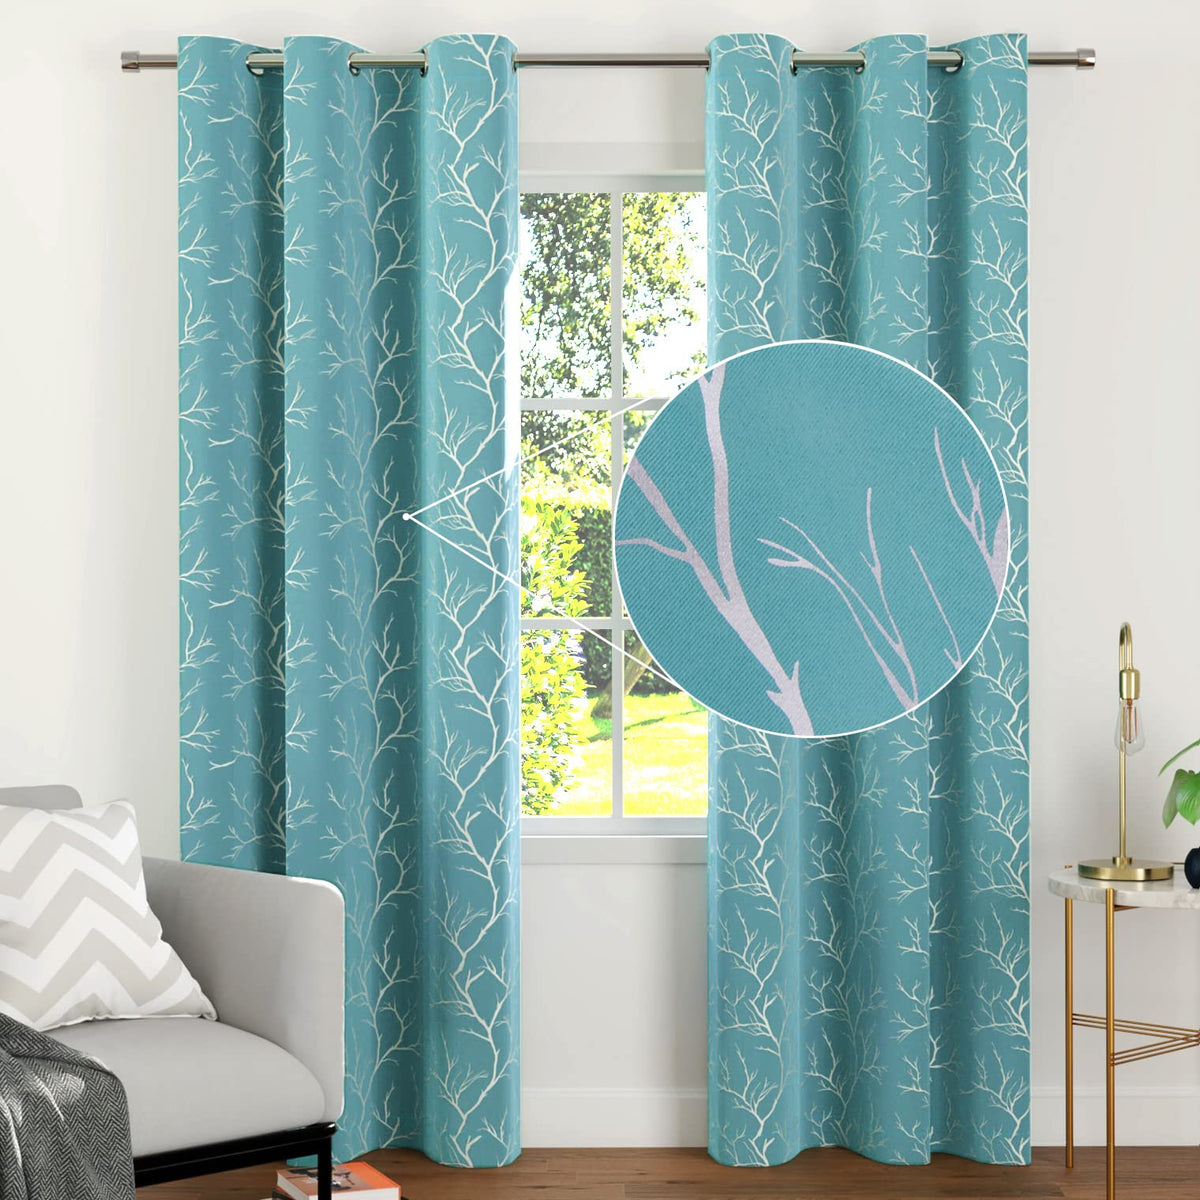 Encasa Homes Room Darkening Blackout Curtains 2 Panels Silver Foil Printed Plain Colours for Kids Bedroom, Living Room with Grommet, 85% Light Blocking, Sound & Heat Reducing, 8 ft -Twigs Teal